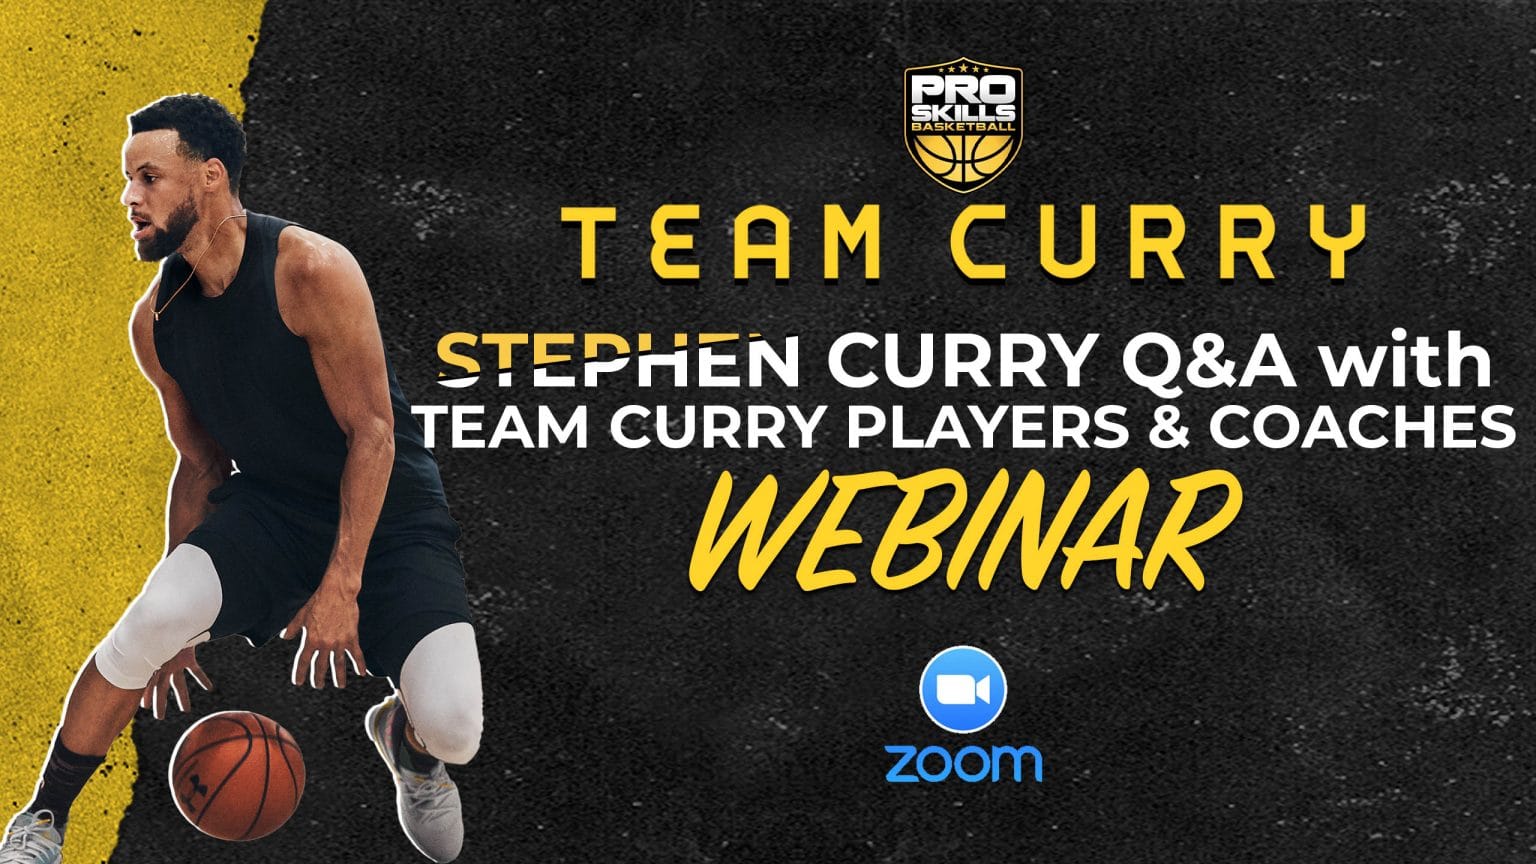 Stephen Curry Q&A with Team Curry AAU Basketball Players & Coaches